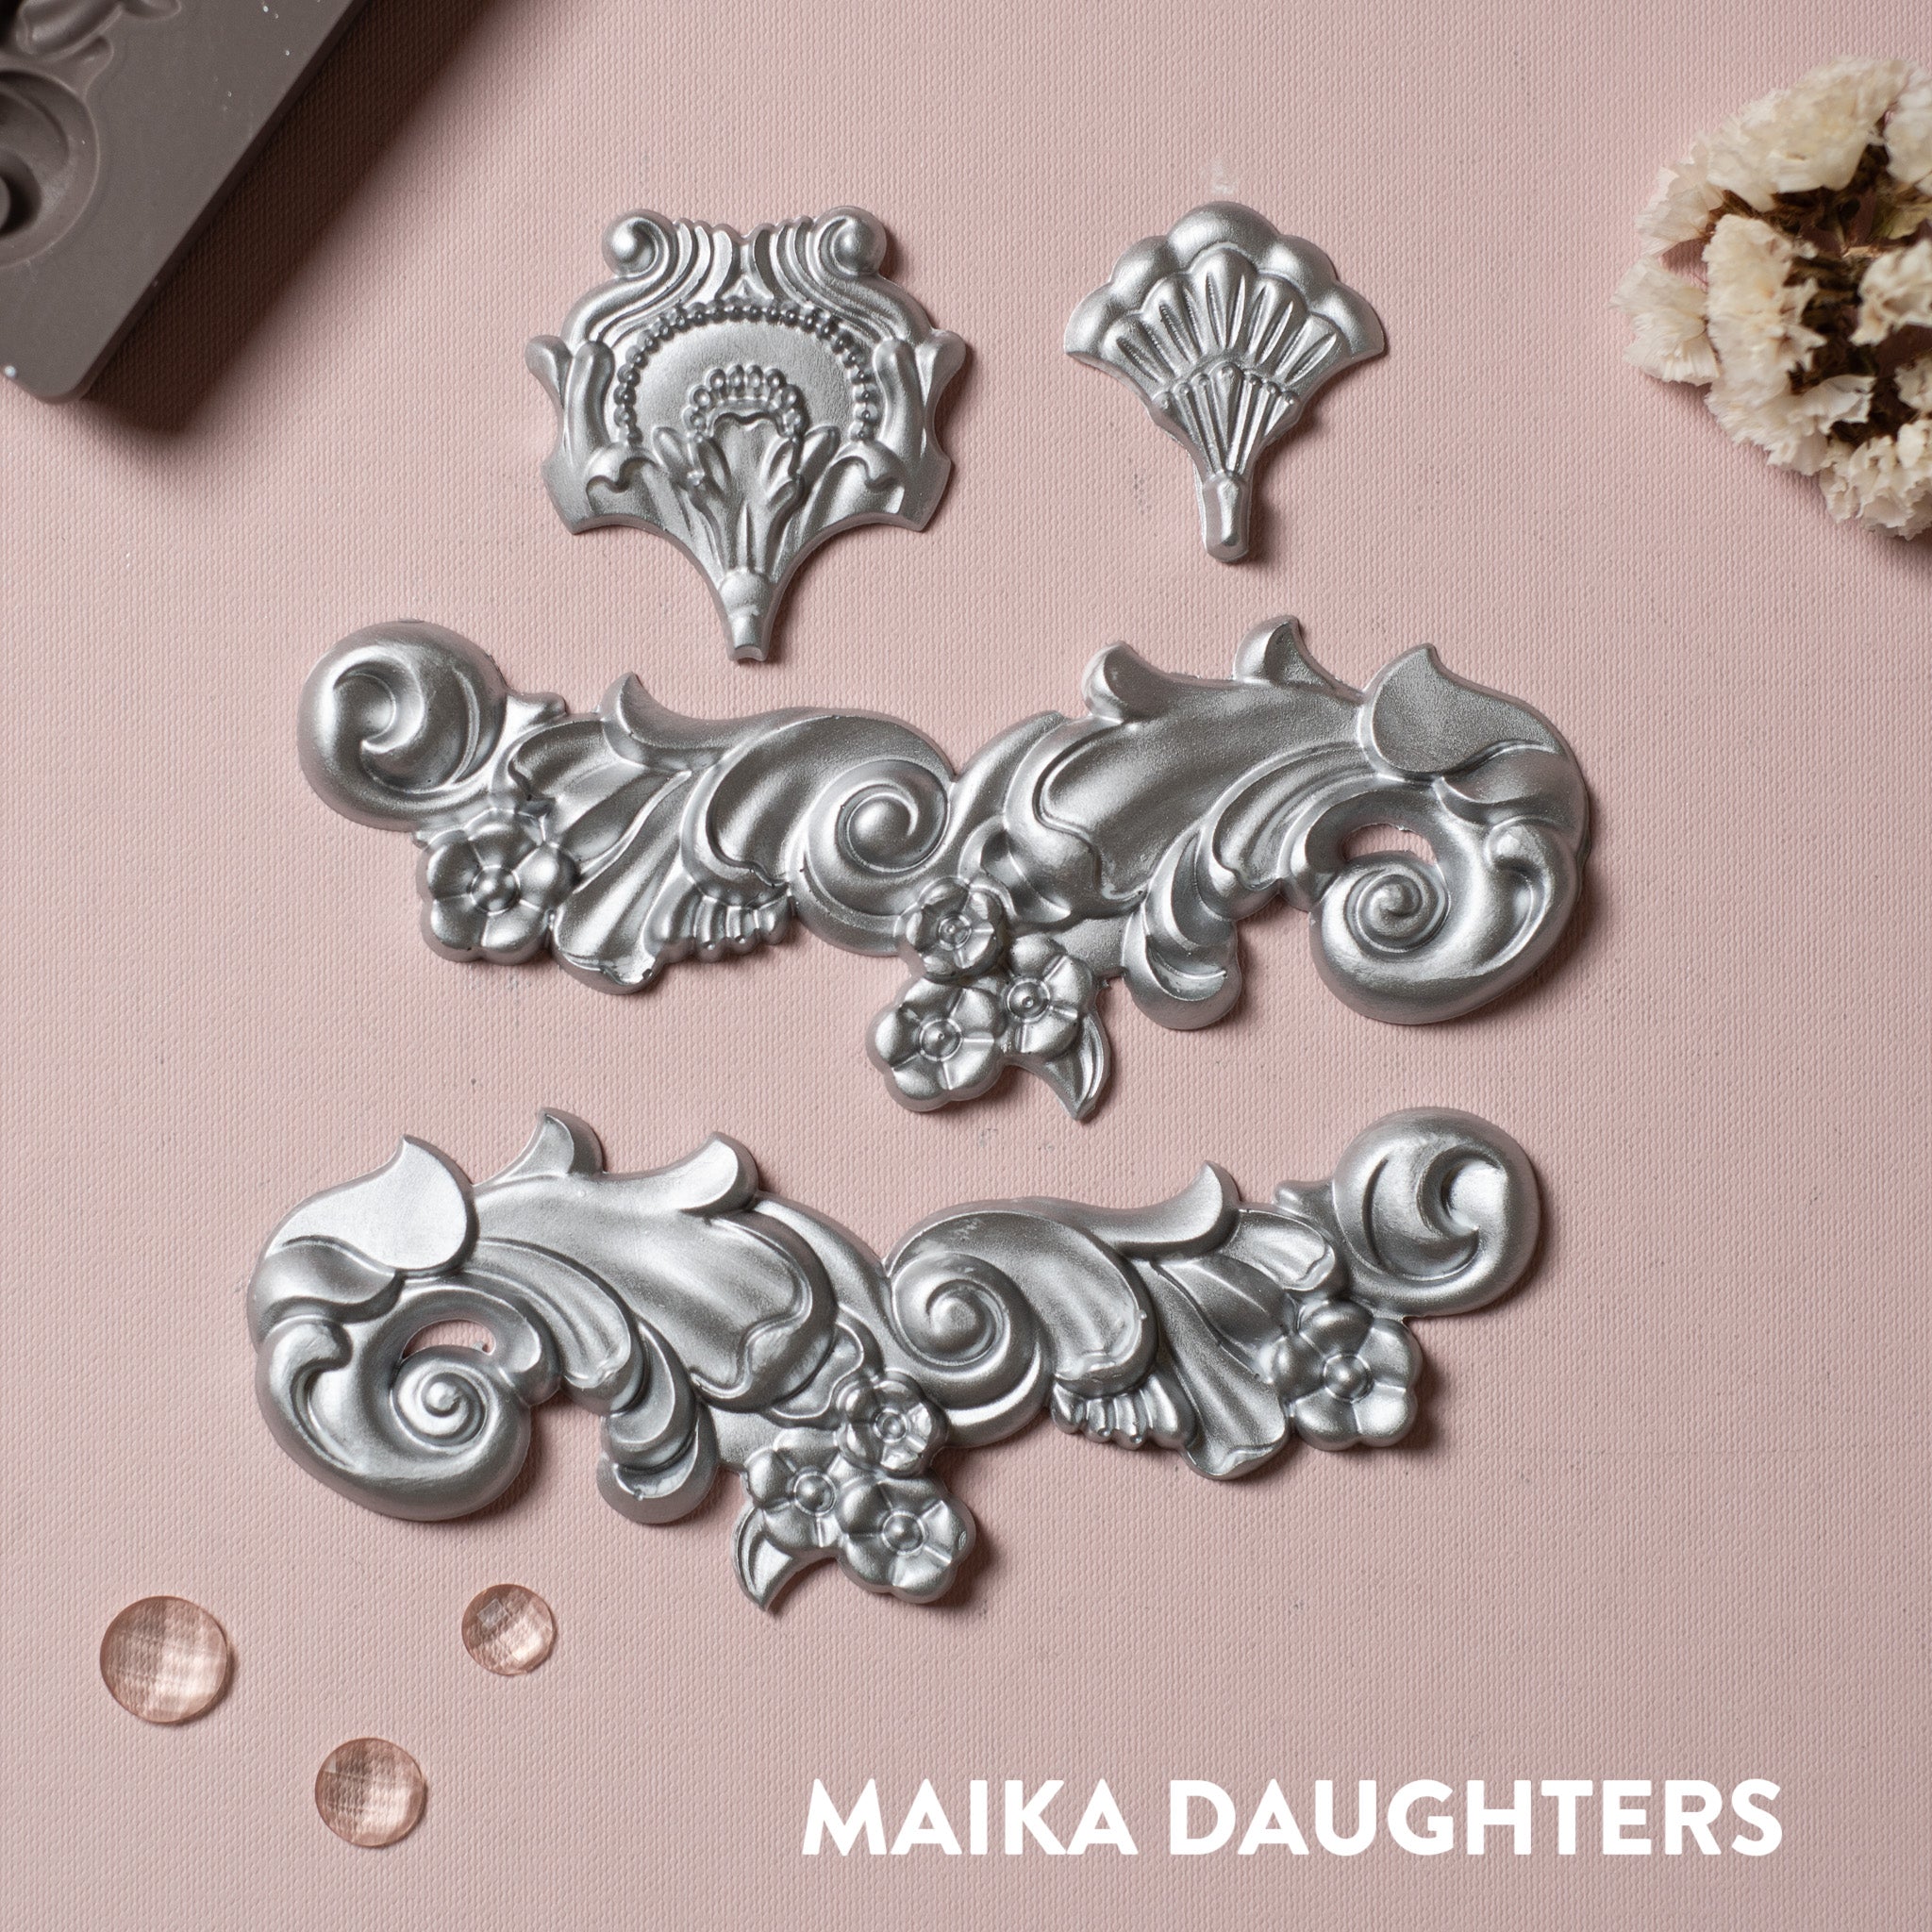 Groeneville Crest silver mold castings on a pink background. A white Maika Daughters logo on the bottom right.